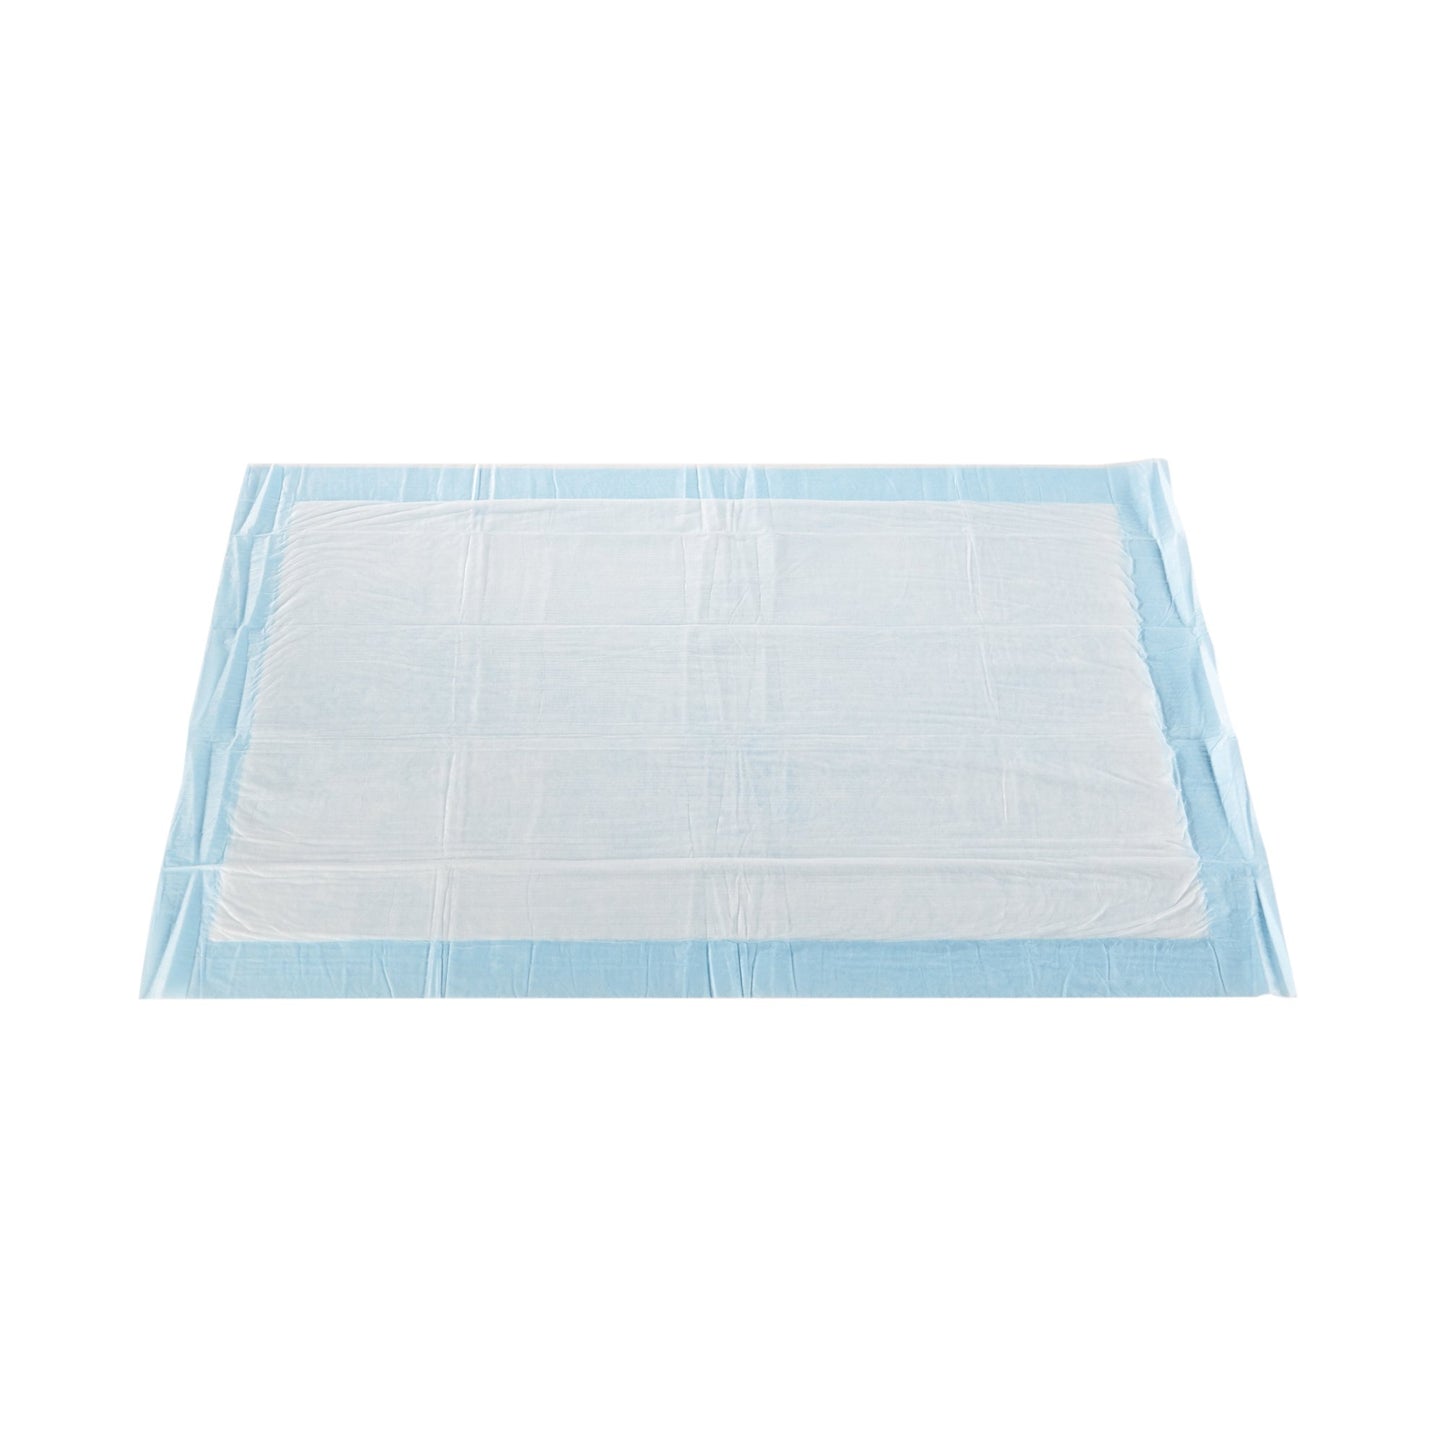 McKesson Classic Light Absorbency Underpad, 23 x 36 Inch, 150 ct